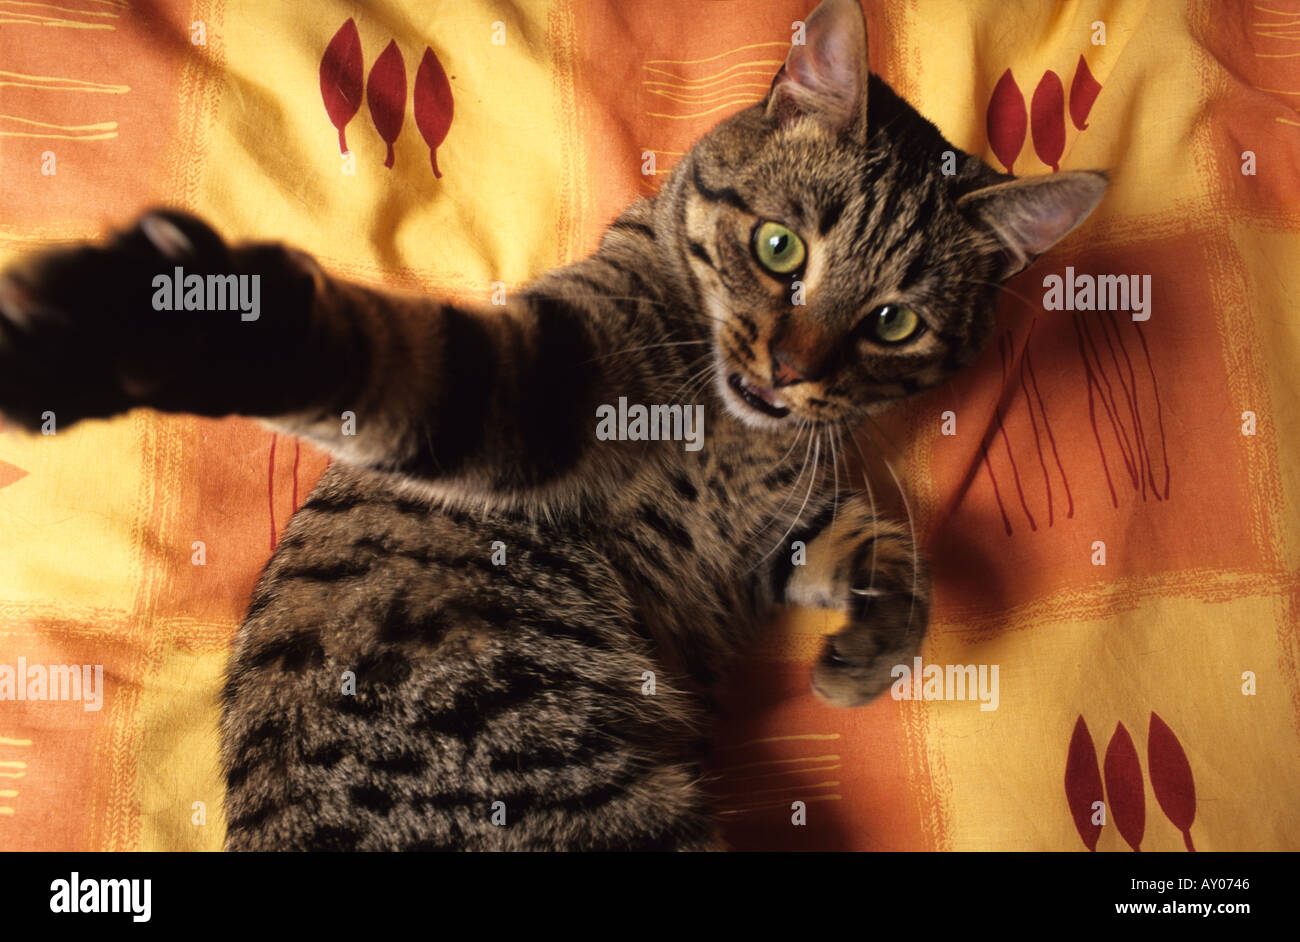 fierce cat swiping with claws Stock Photo